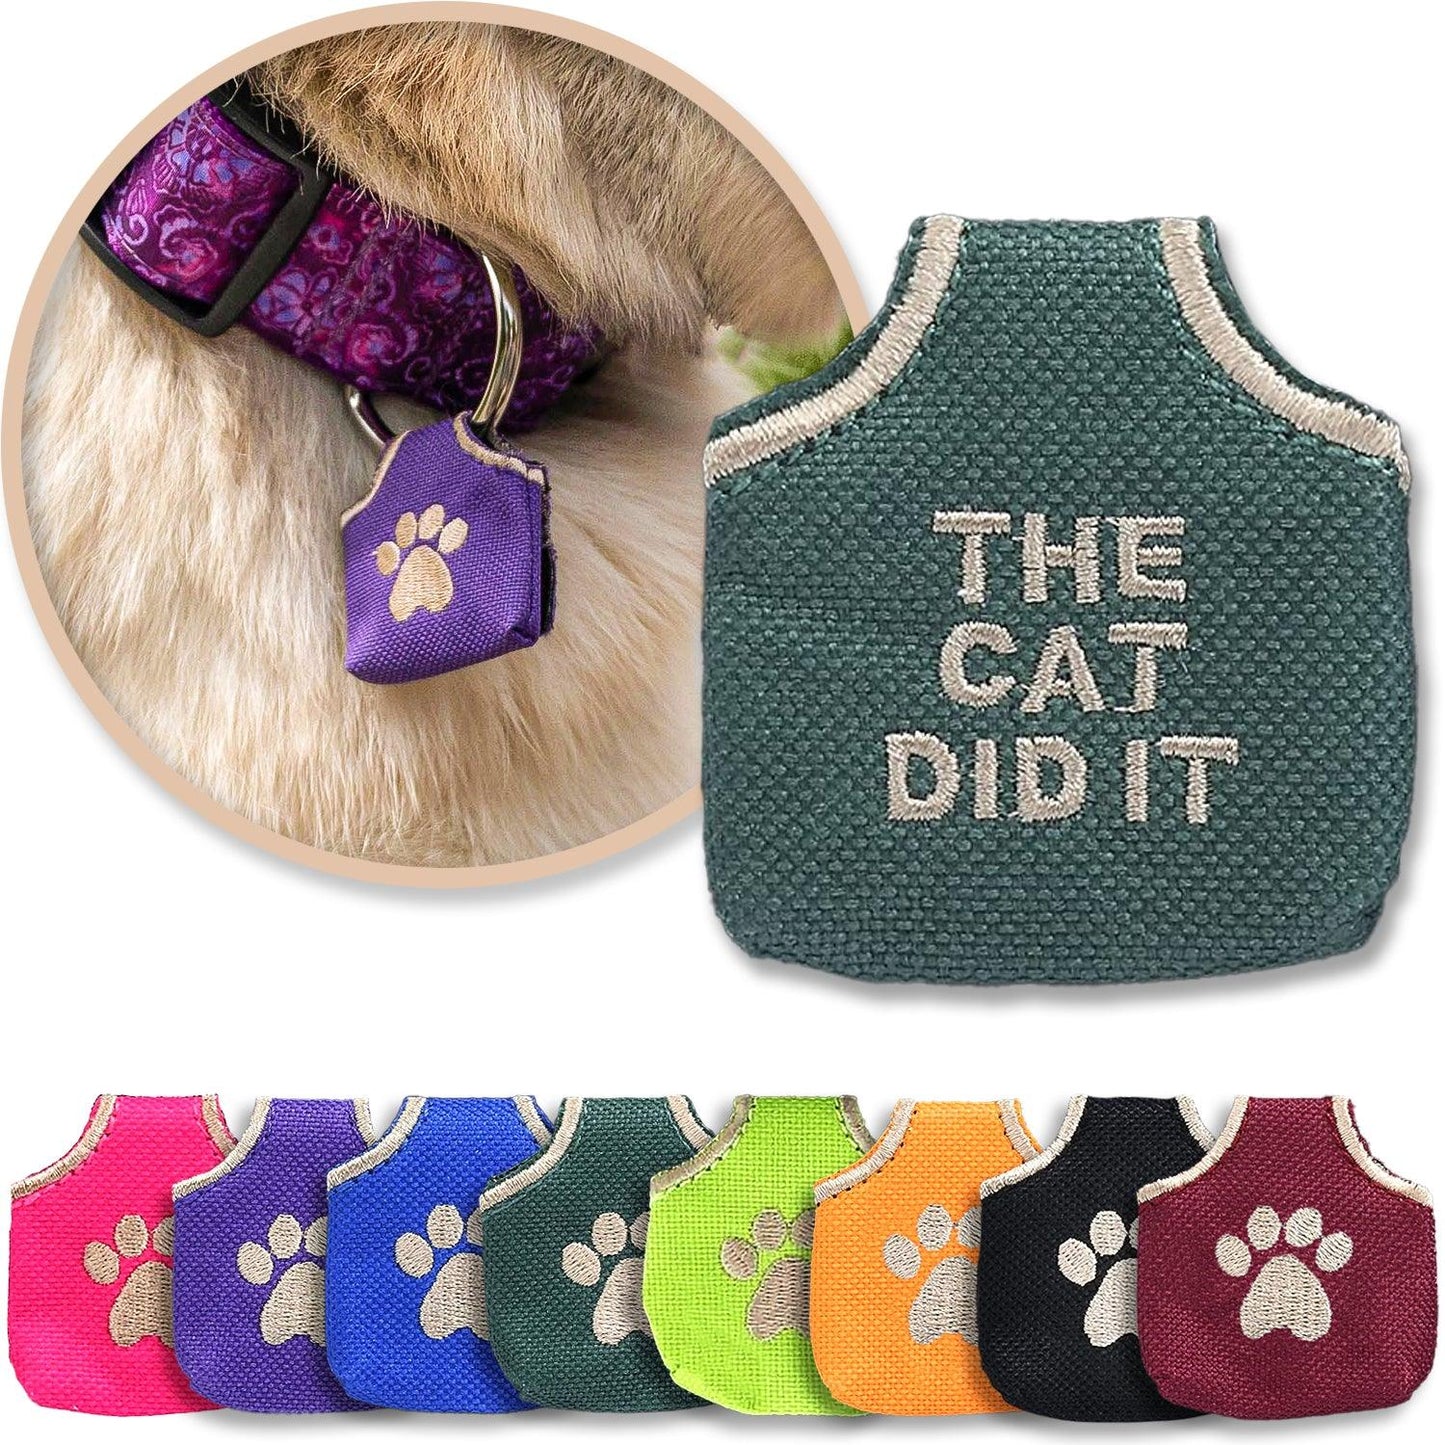 Green 'the cat did it' dog tag cover